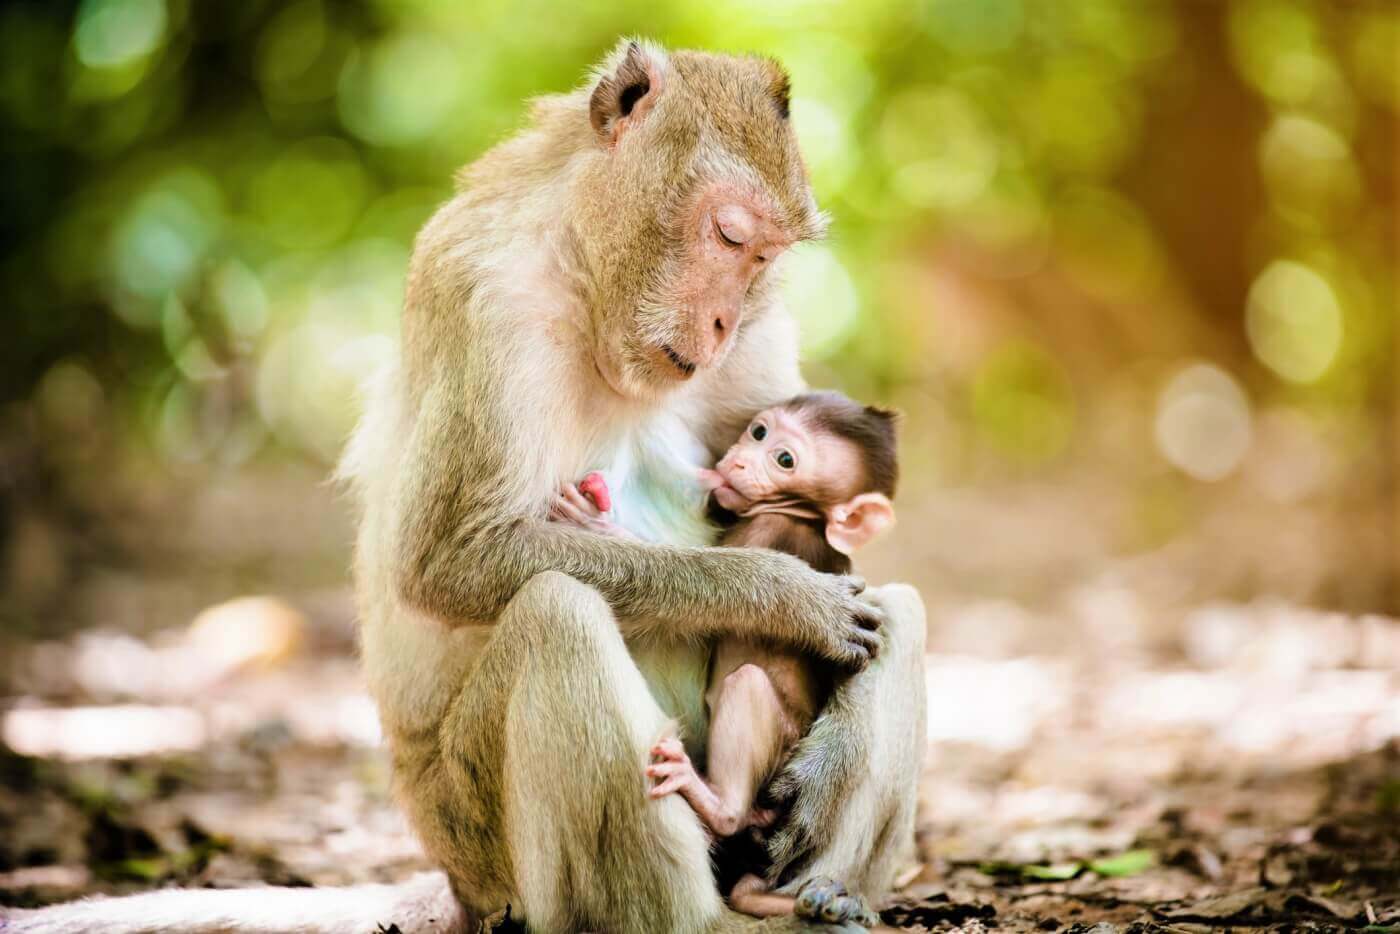 mother baby long tailed macaque JOINN Biologics Buys Land in Florida to Import Monkeys